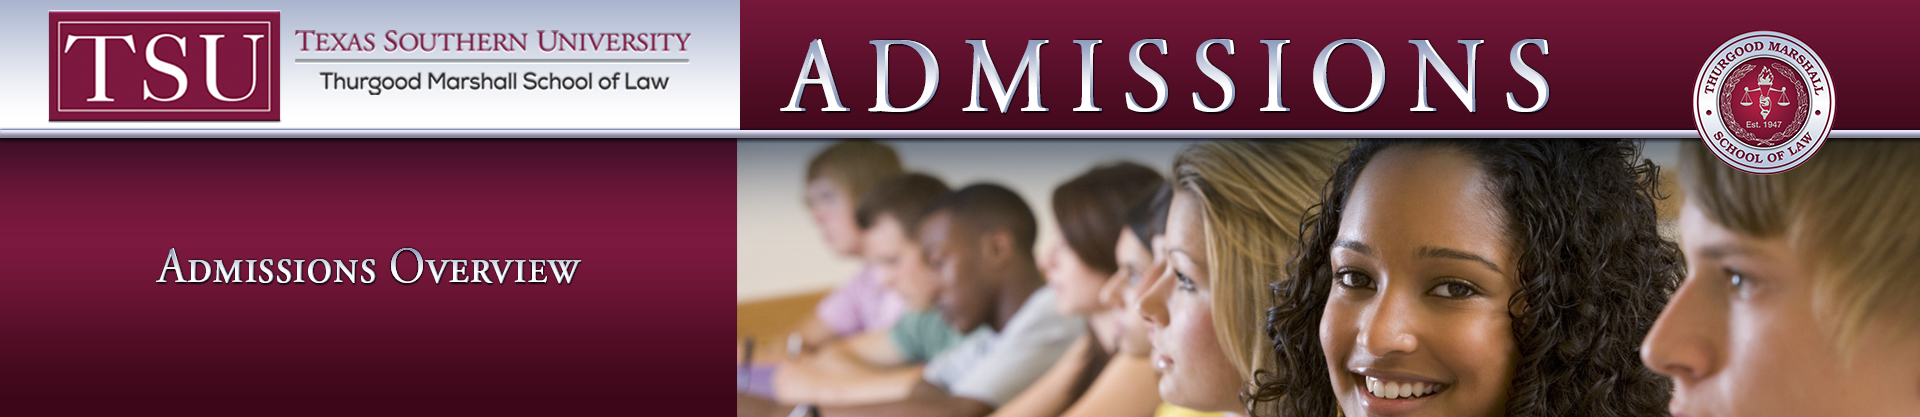 Admissions Overview